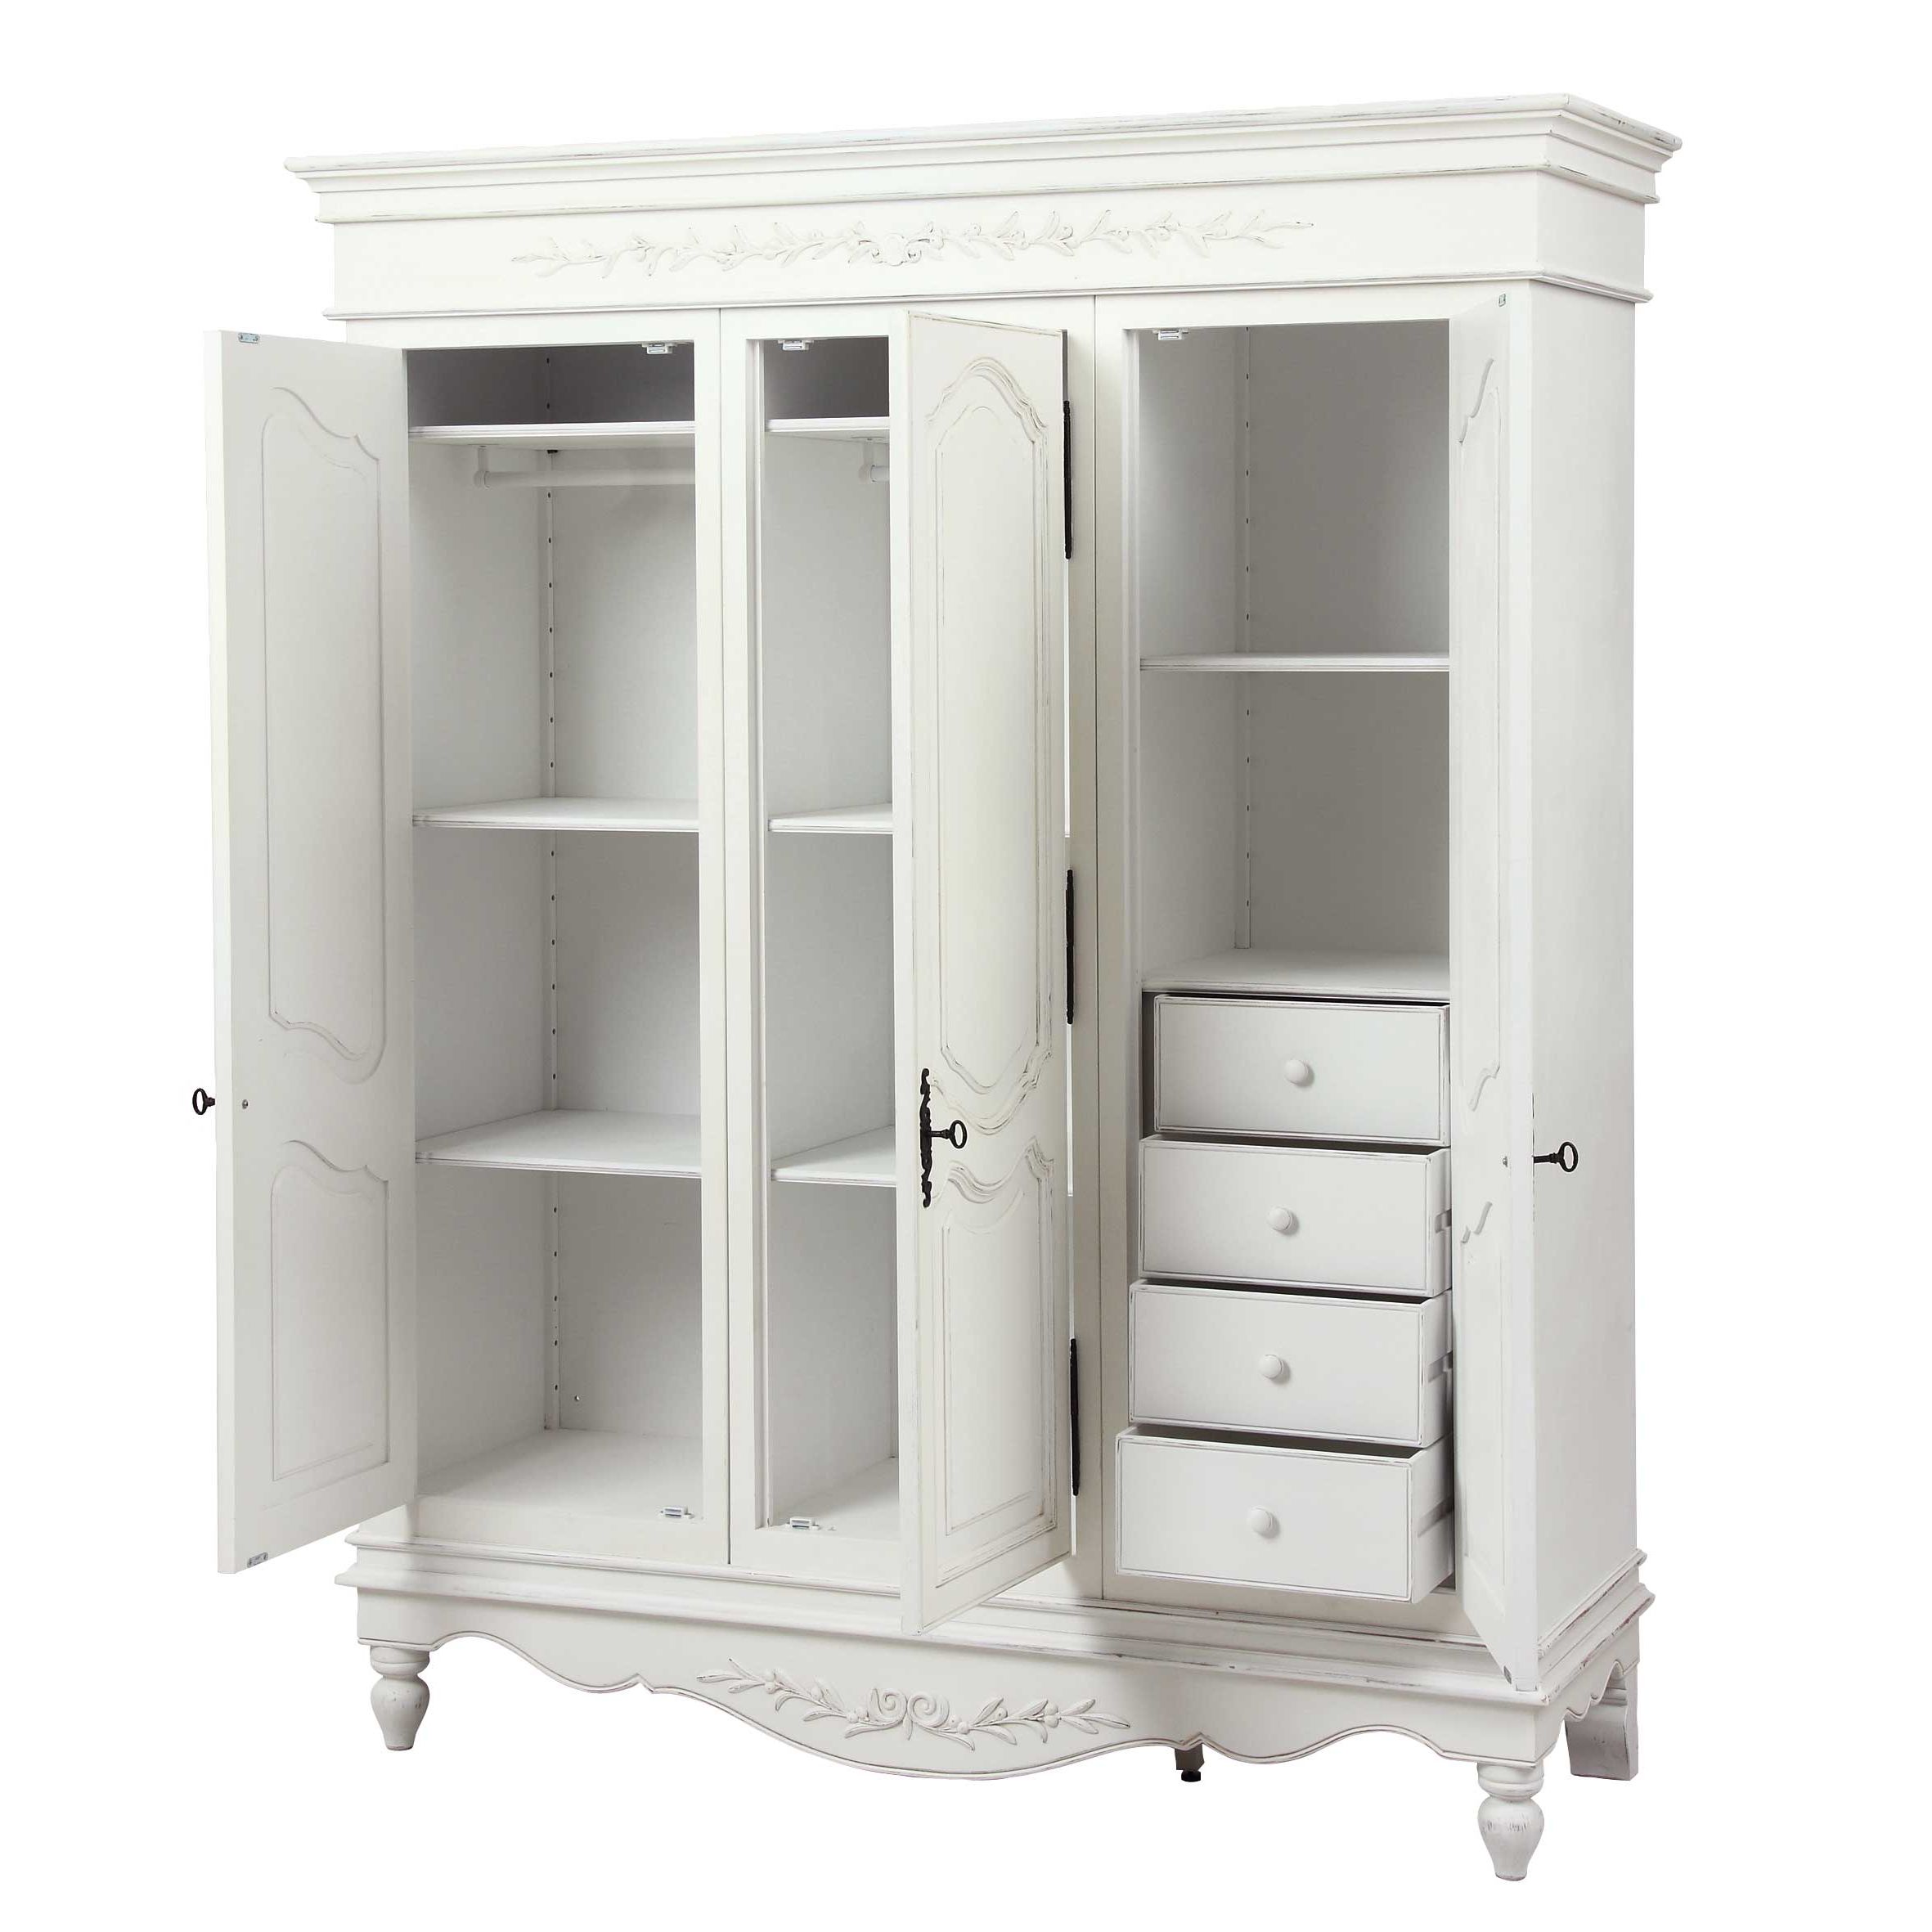 French 3 Door Wardrobe – Romance – Low Cost Delivery, Nationwide Inside 3 Door French Wardrobes (View 6 of 20)